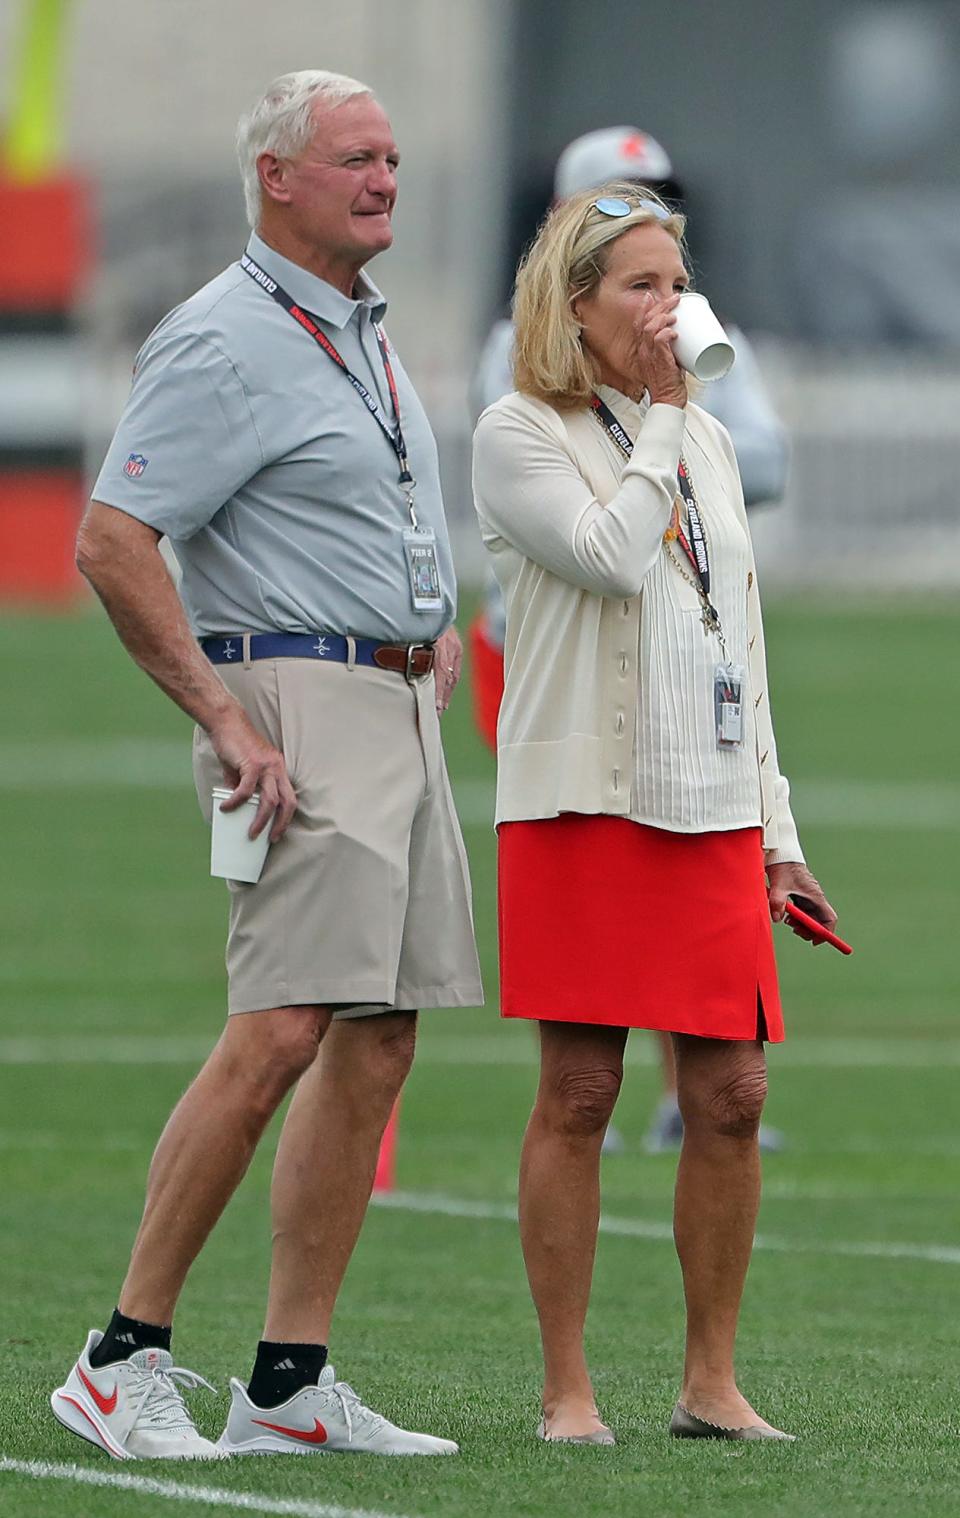 Cleveland Browns owners Jimmy and Dee Haslam watch their team practice during NFL football training camp, Thursday, July 29, 2021, in Berea, Ohio.